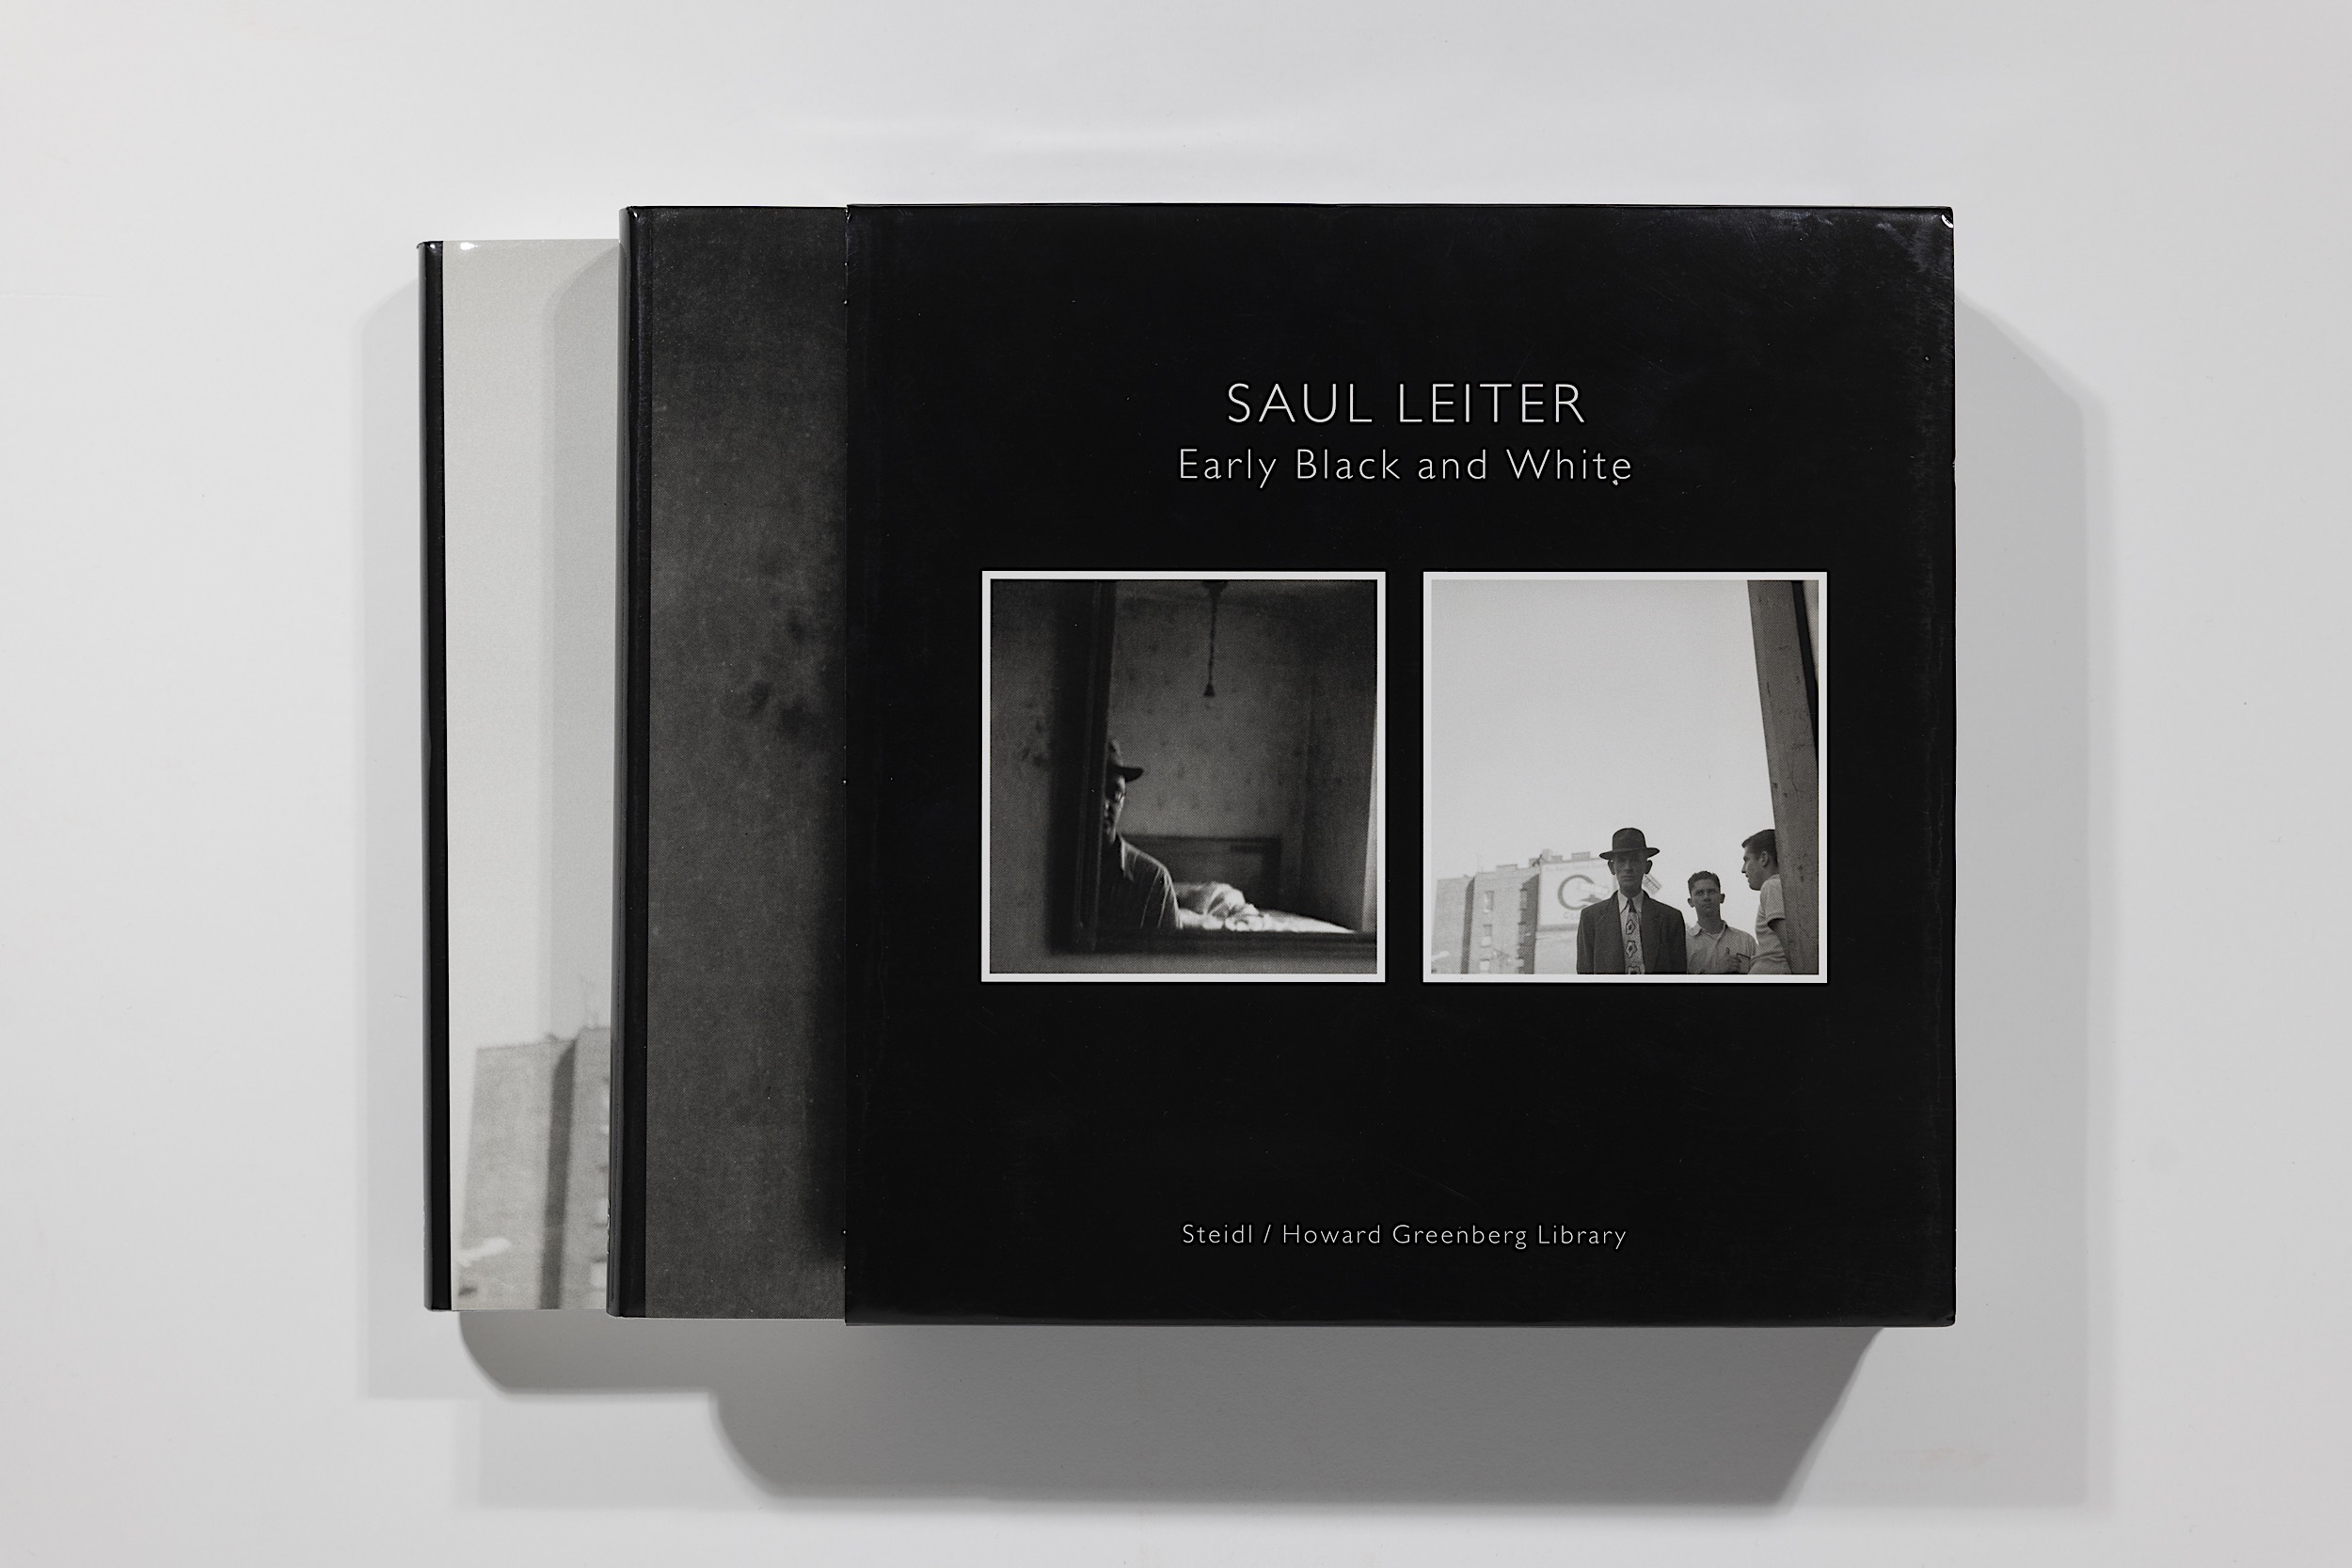 Saul Leiter - Early Black and White Image 2